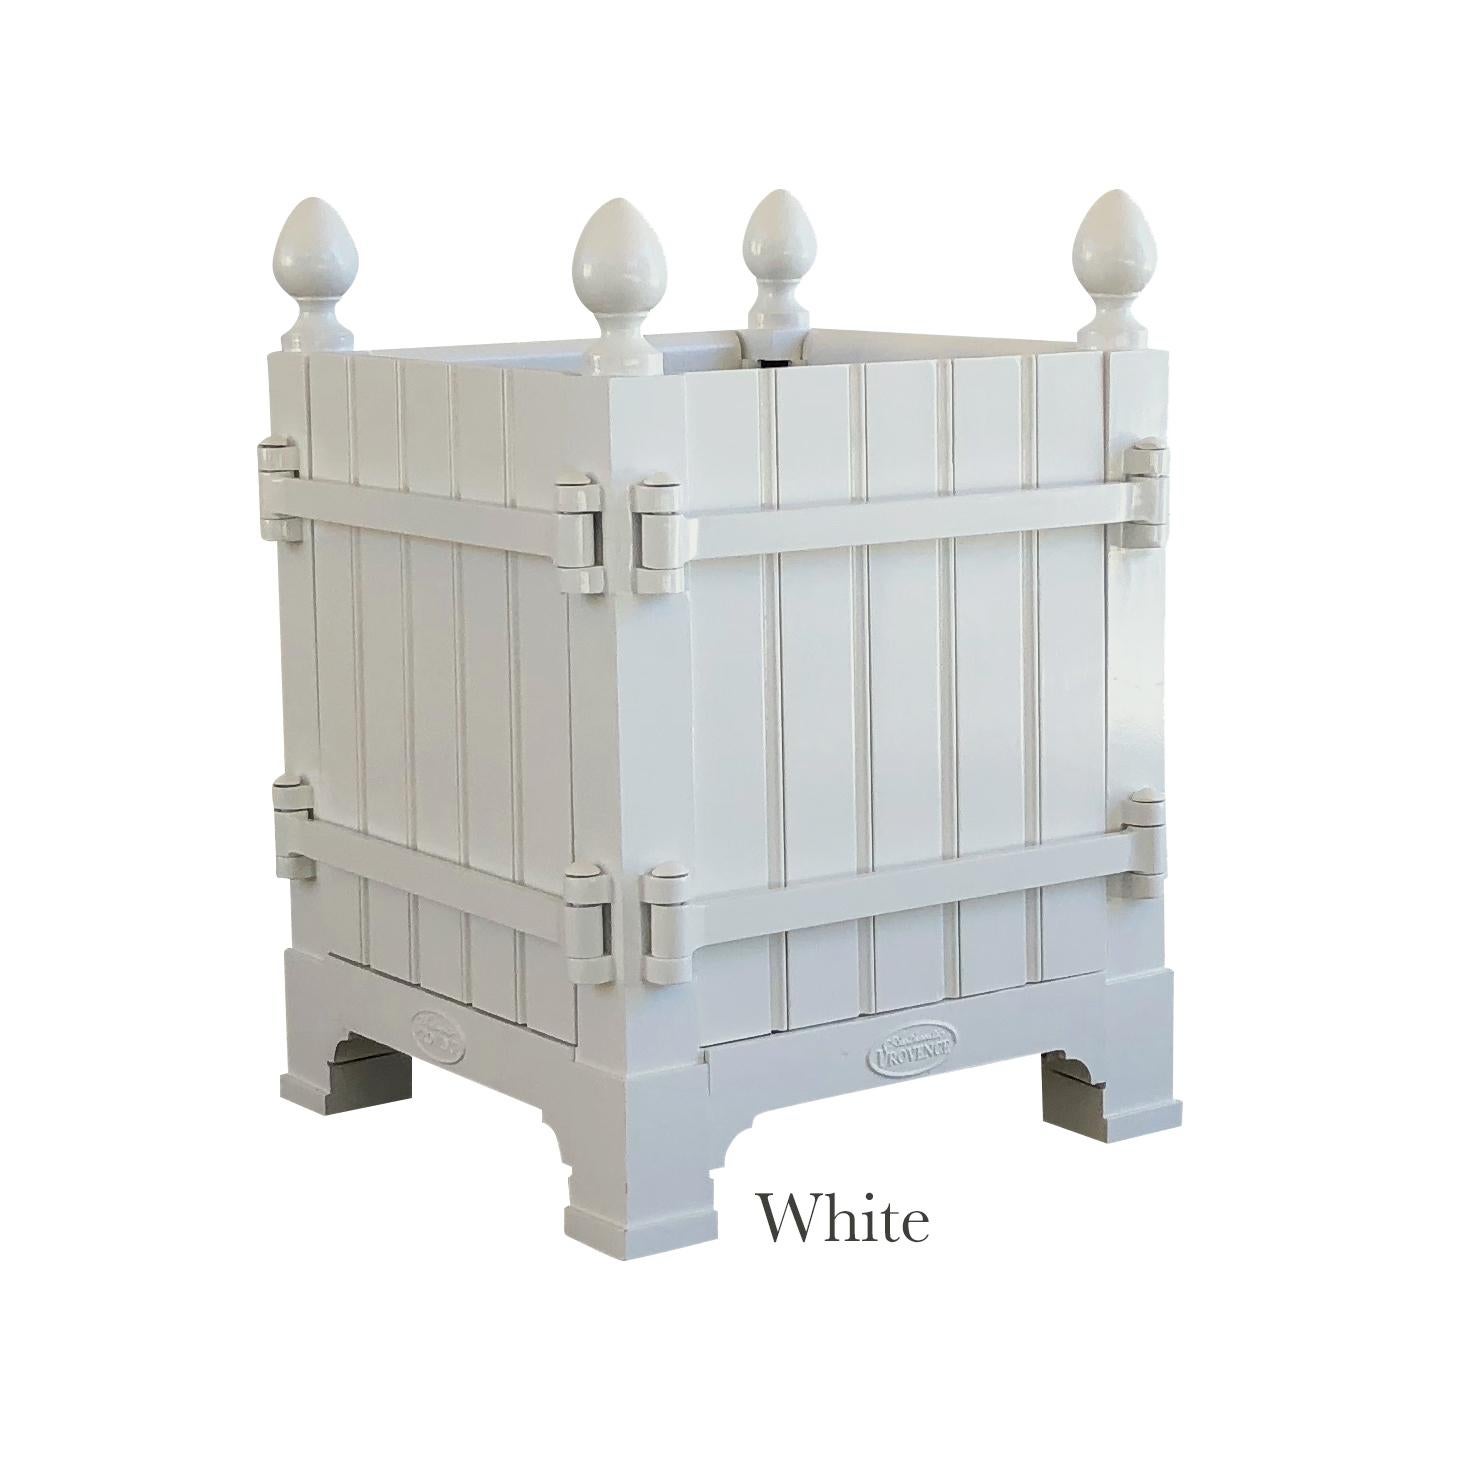 Authentic Provence Caisse de Versailles are composed of an aluminum metal frame. The panels are made of teak wood and therefore are extremely durable and weather resistant. The bottom of the planter is furbished with an aluminum grid to allow the